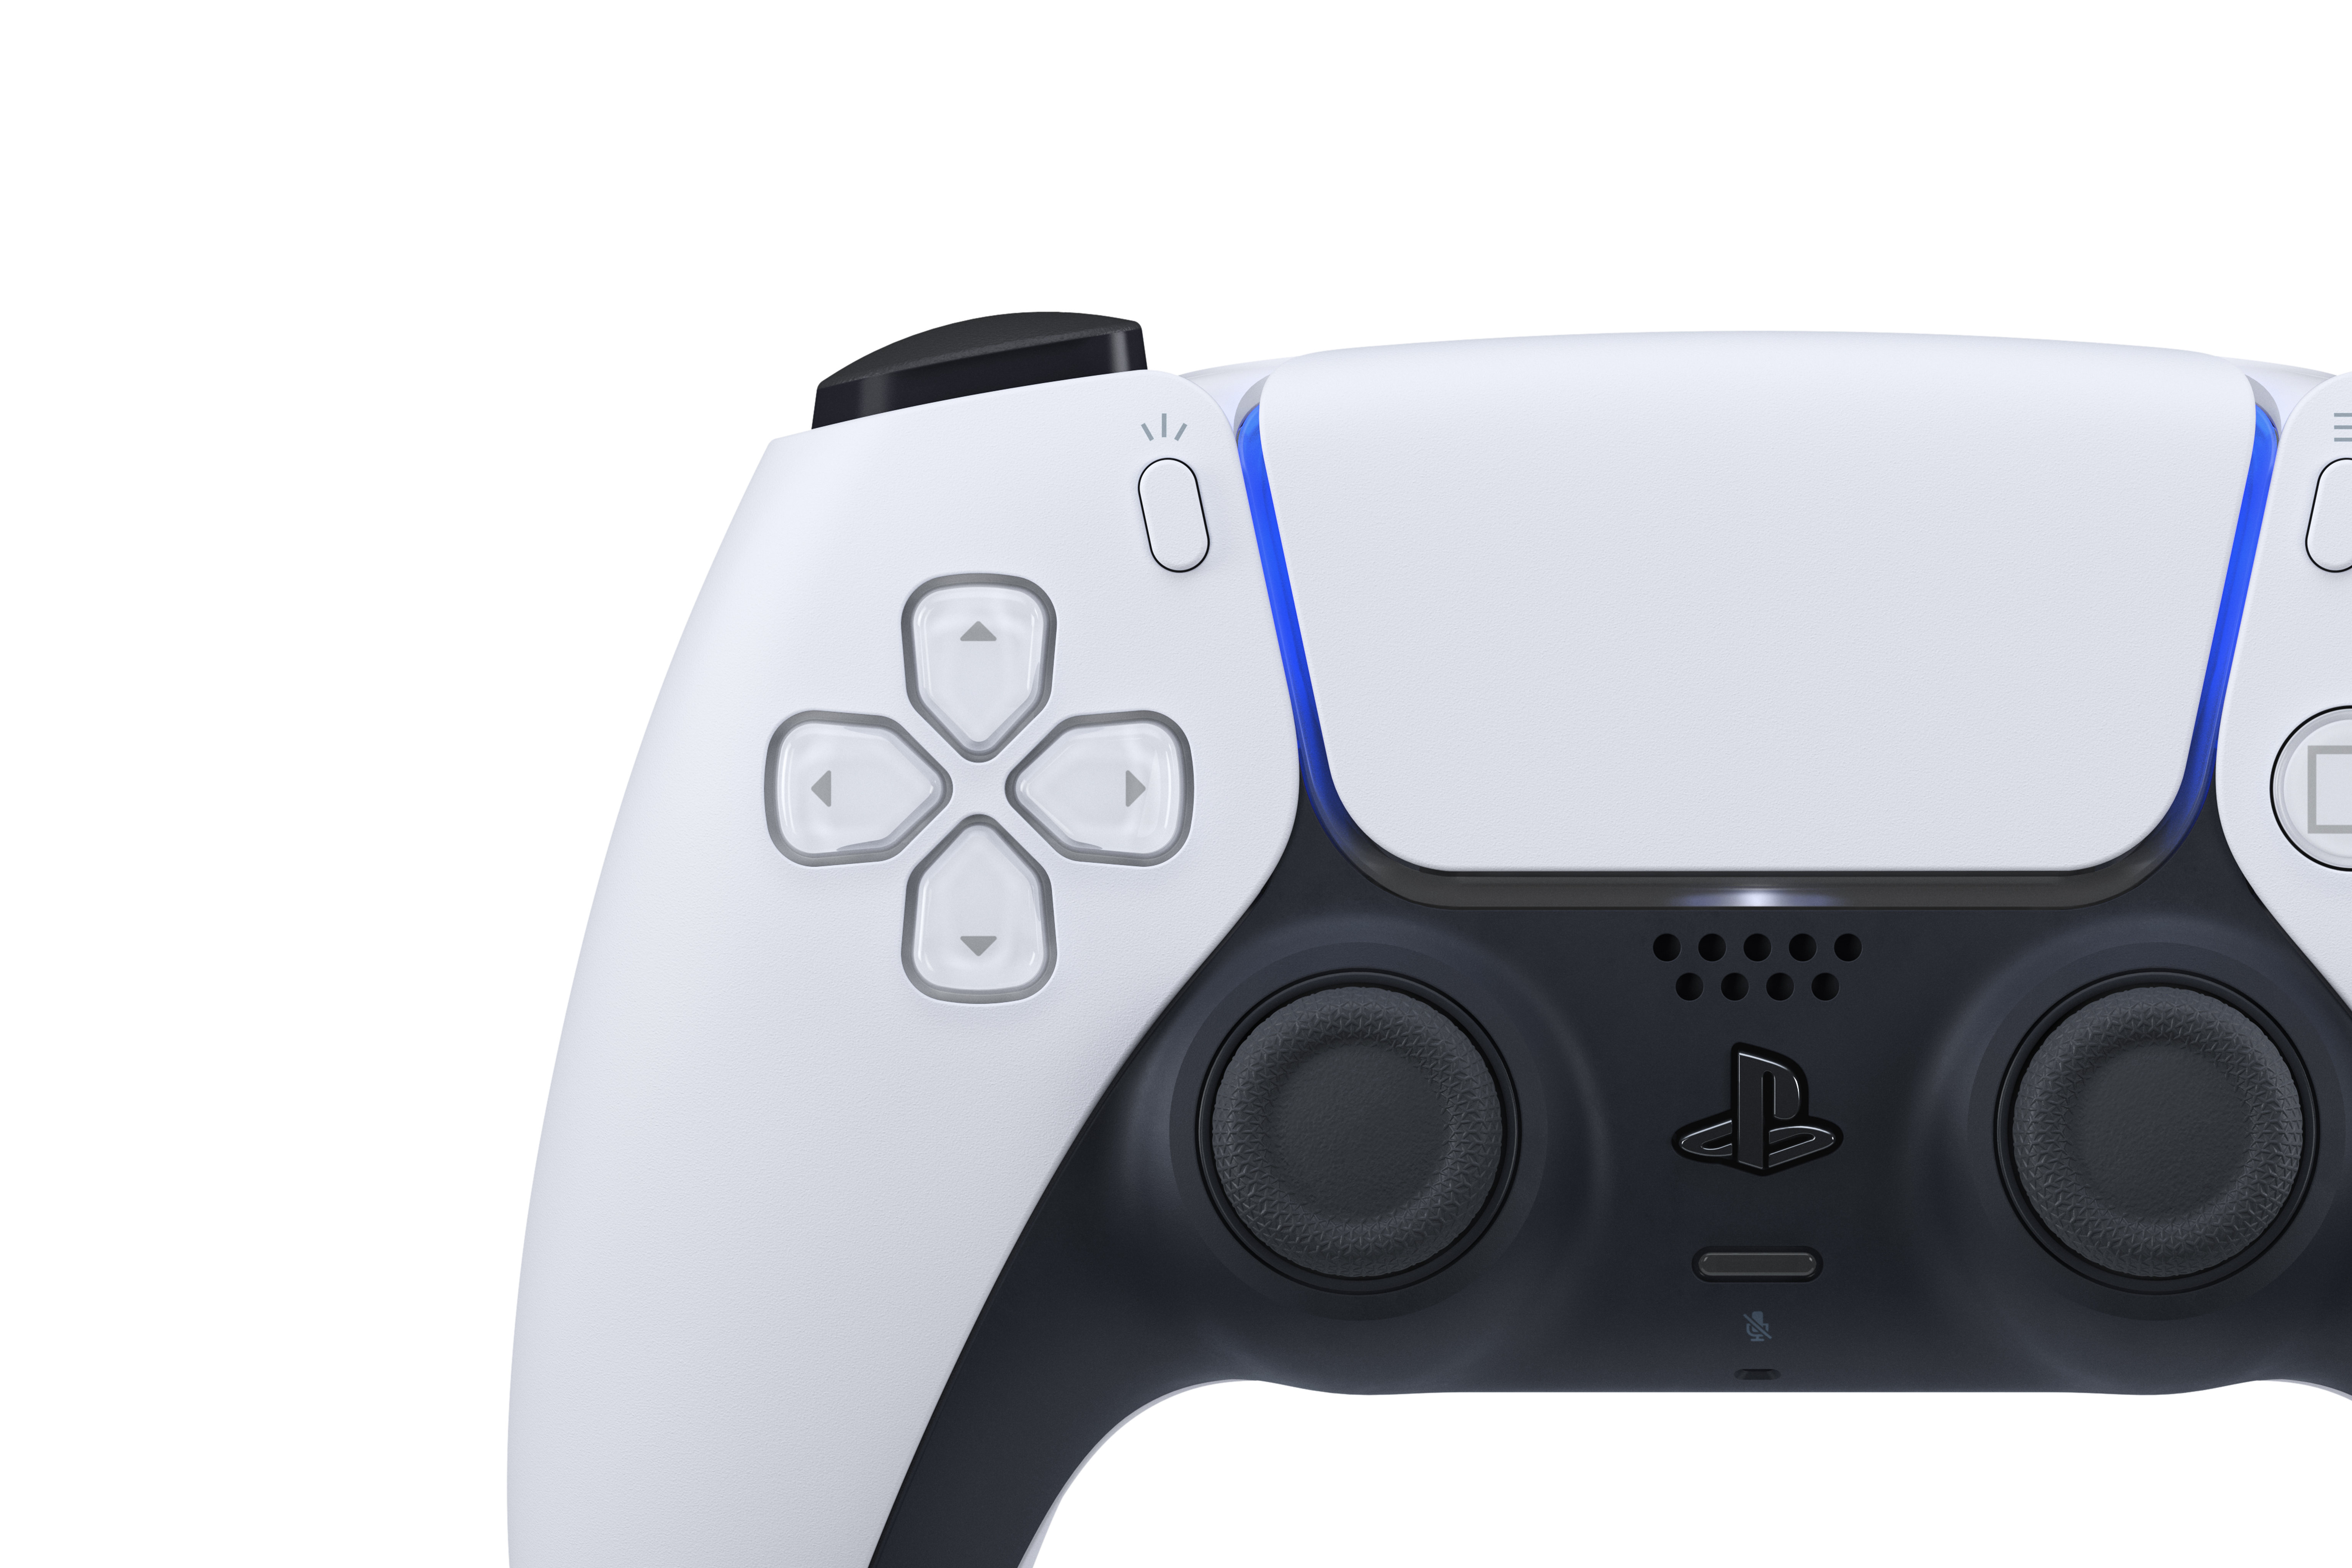 a product photo from the front of the PlayStation 5 controller, the DualSense, showing a close-up of the D-pad and analog sticks